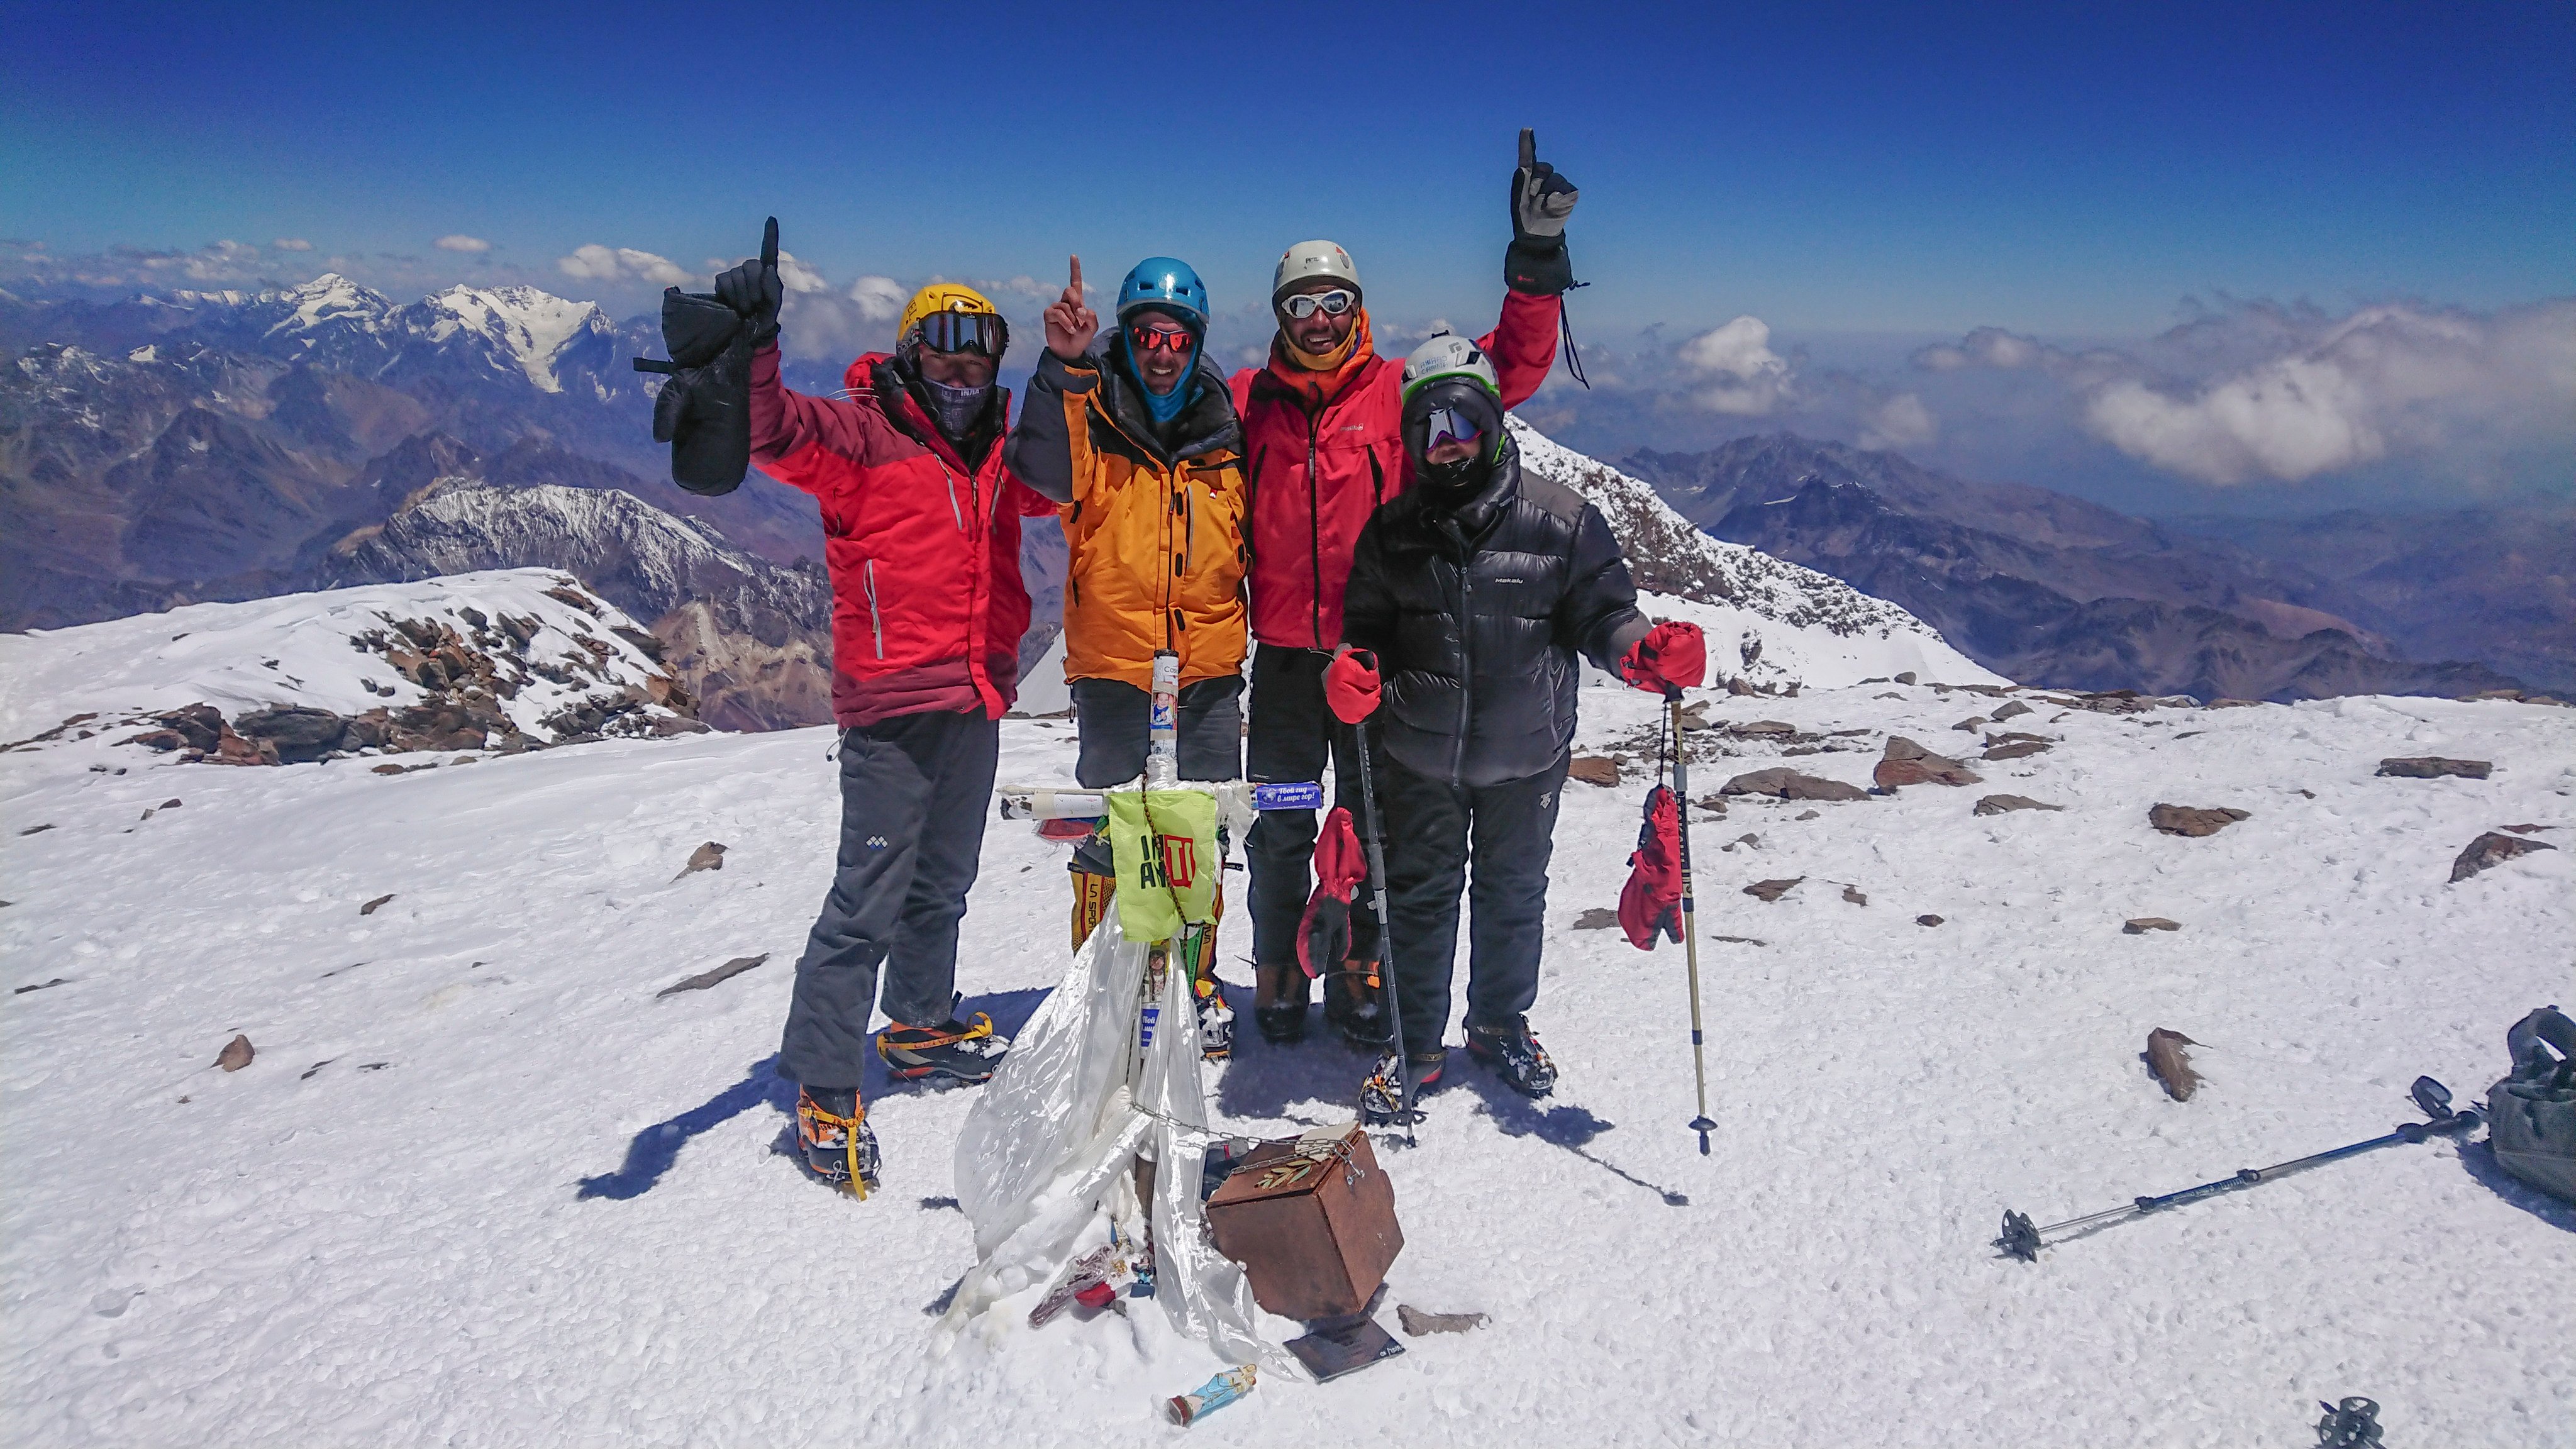 A group celebrate reaching the summit of Mount Aconcagua. Photo: Carina Dayondon